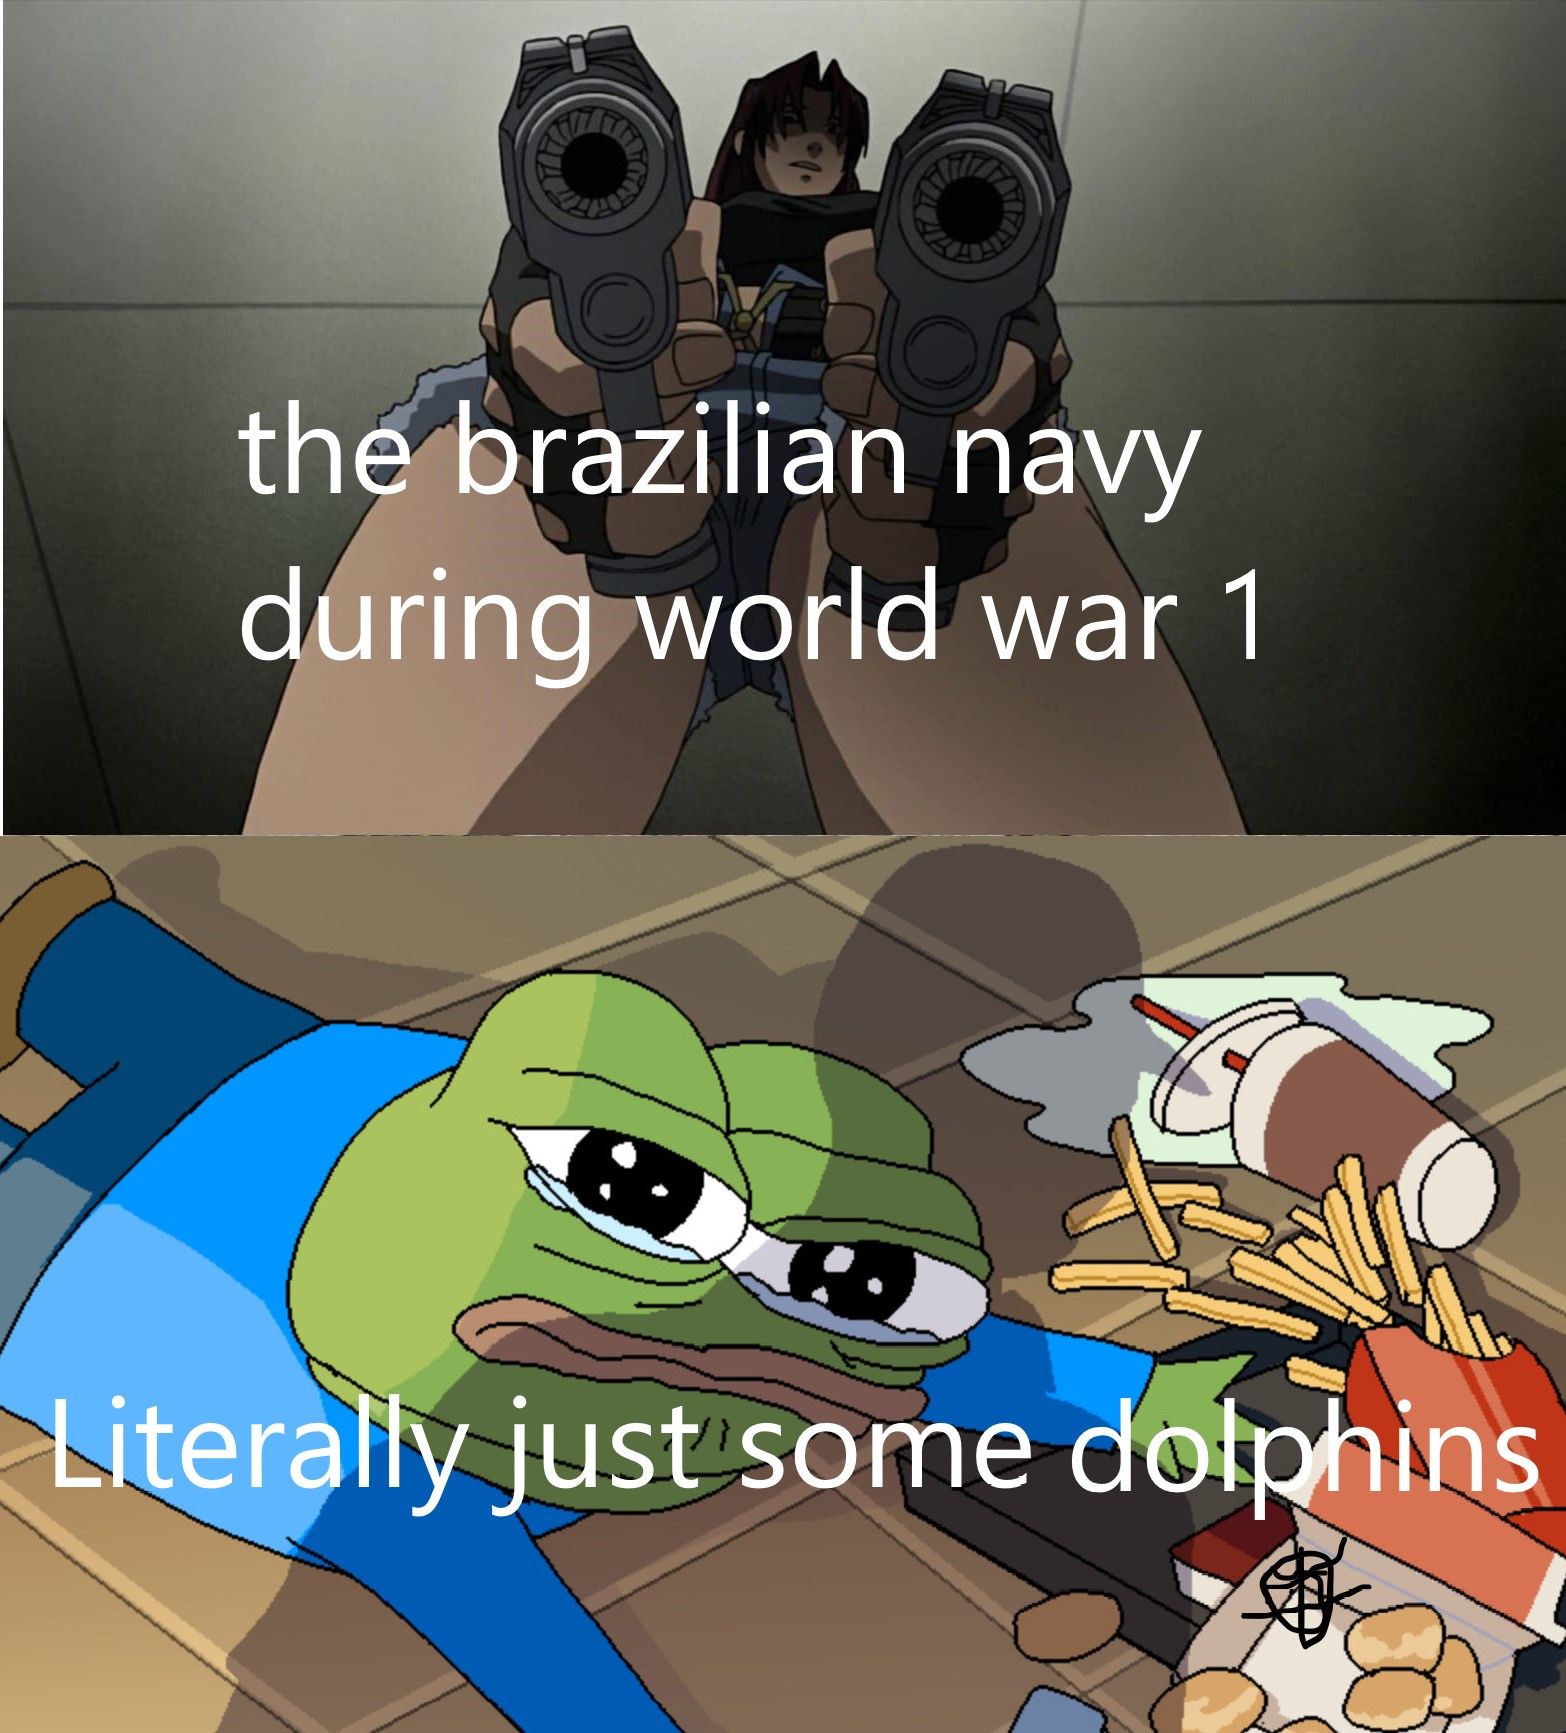 "They were german subs i swear"